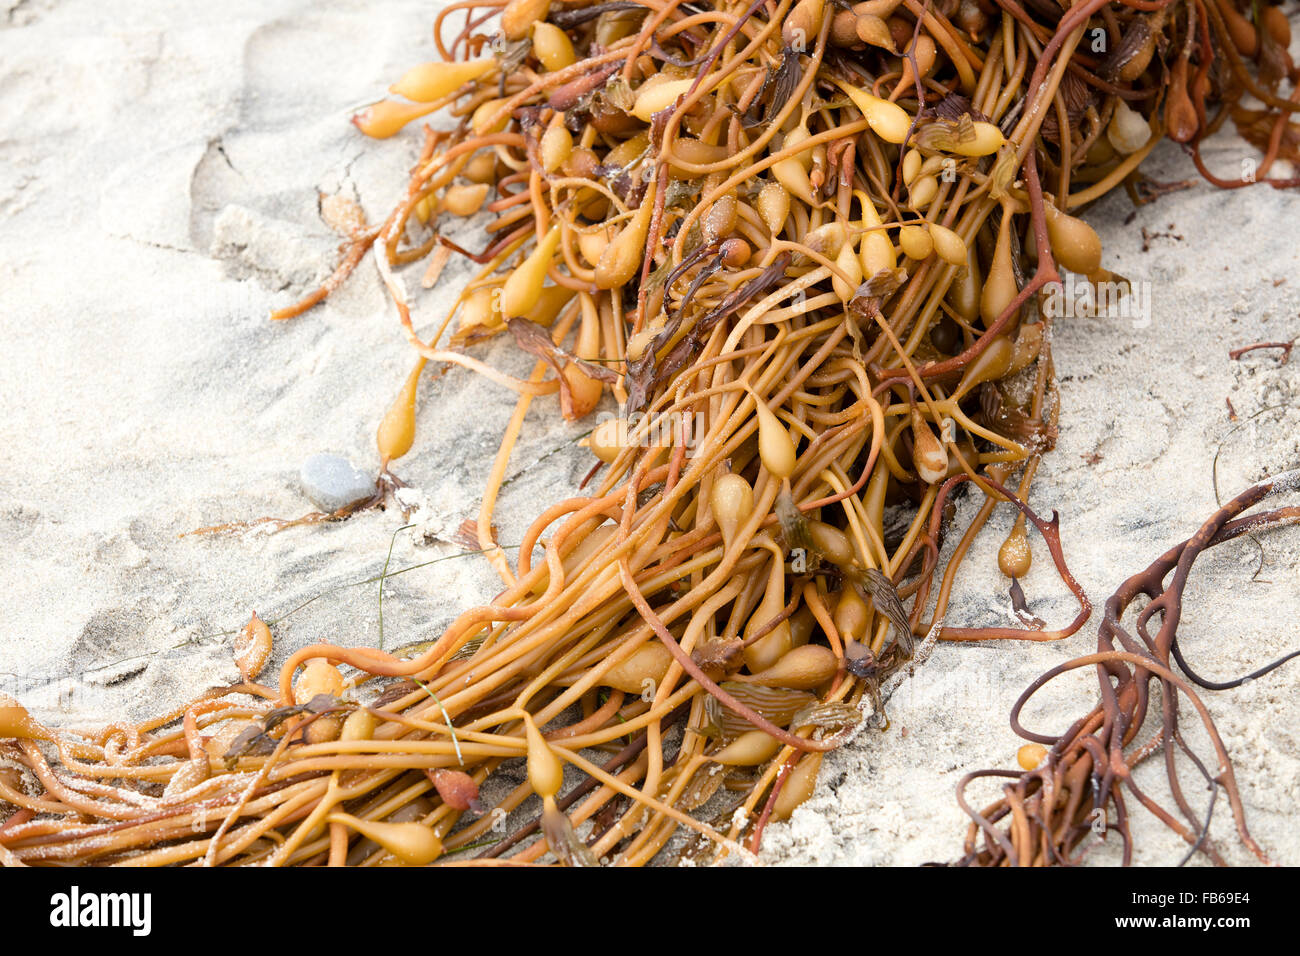 Twisted and knotted seaweed at Swami's Beach in Encinitas, California Stock Photo